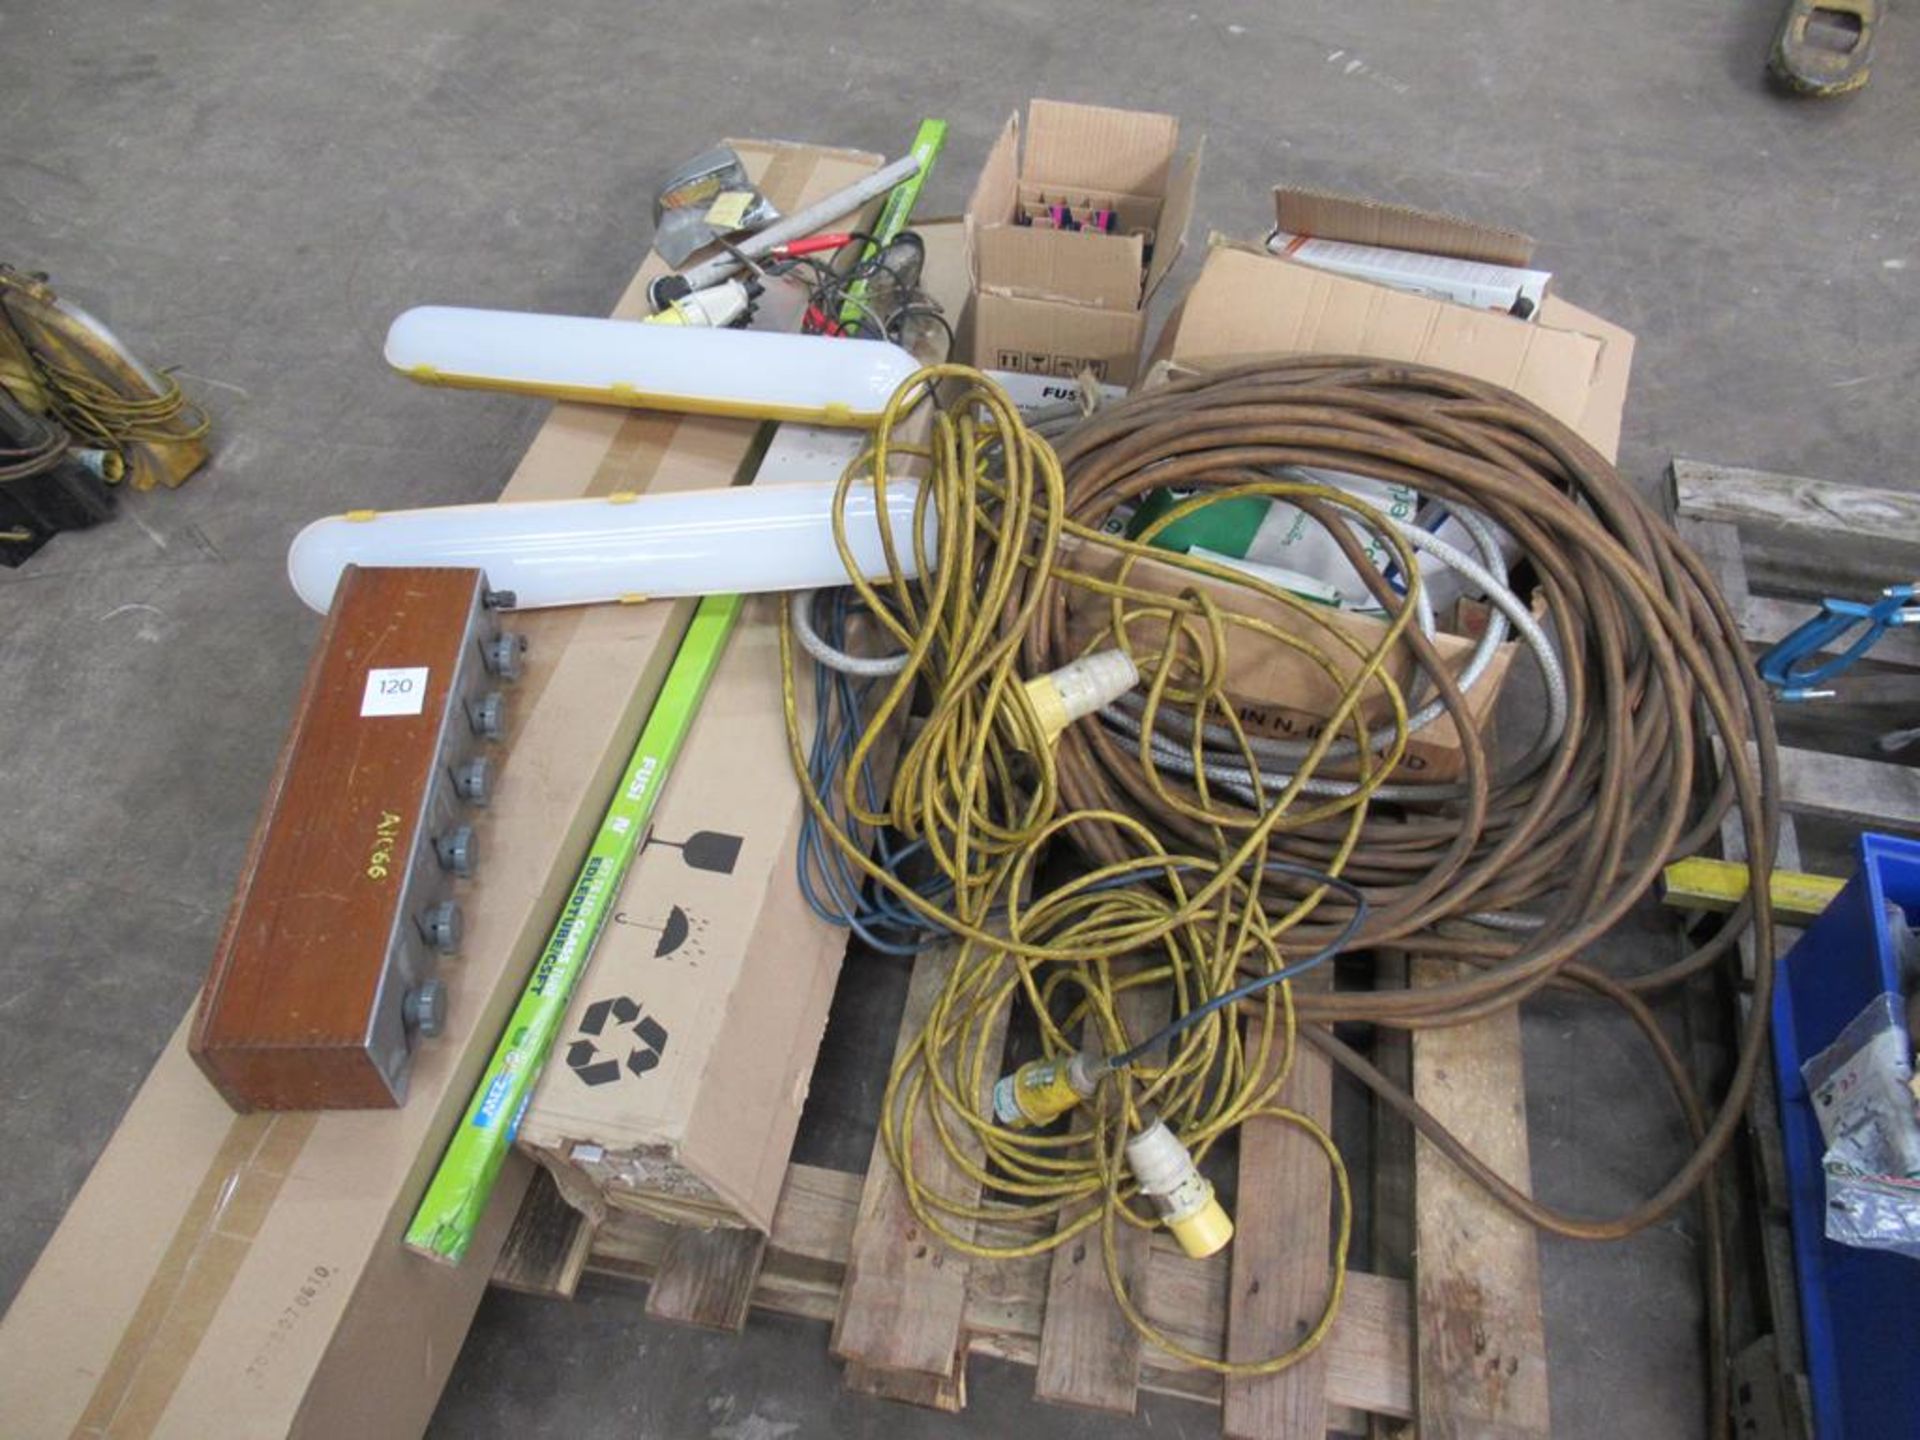 Pallet to contain qty of Sodium Lamps, LED Tubes, 110V Extension Cable etc.